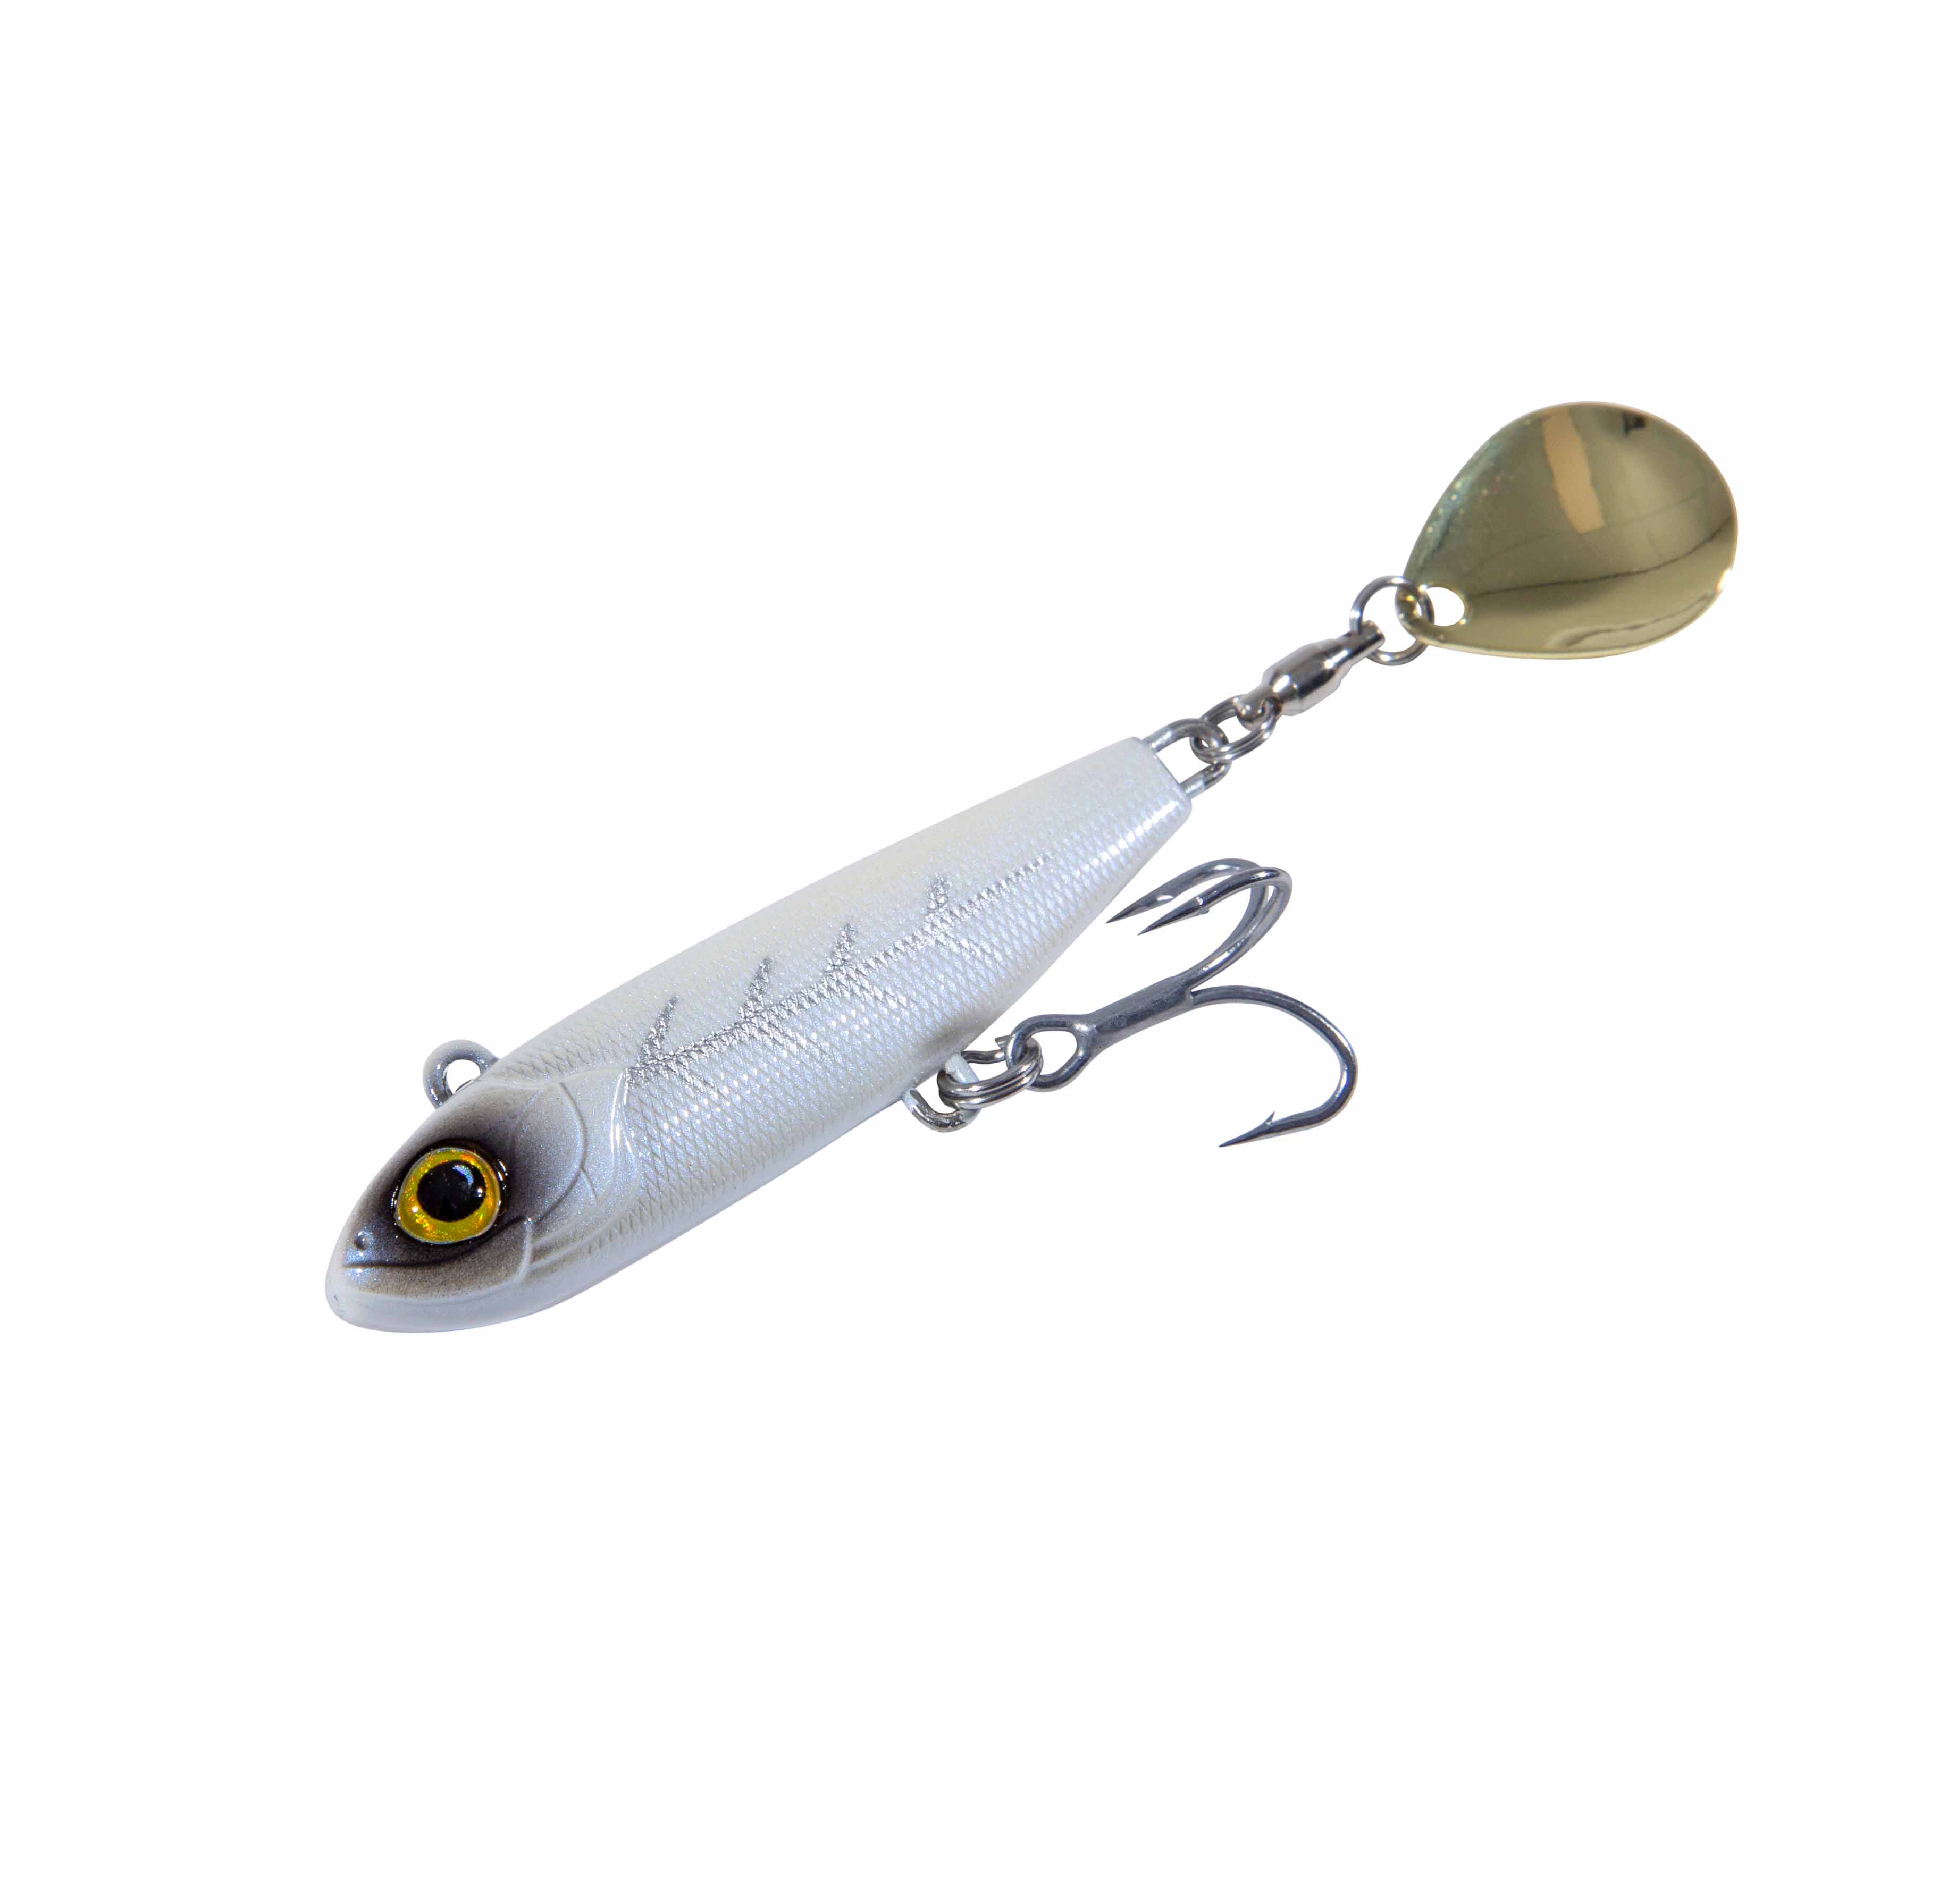 Ultimate X-Tail Jig Spinner 5.4cm (15g)